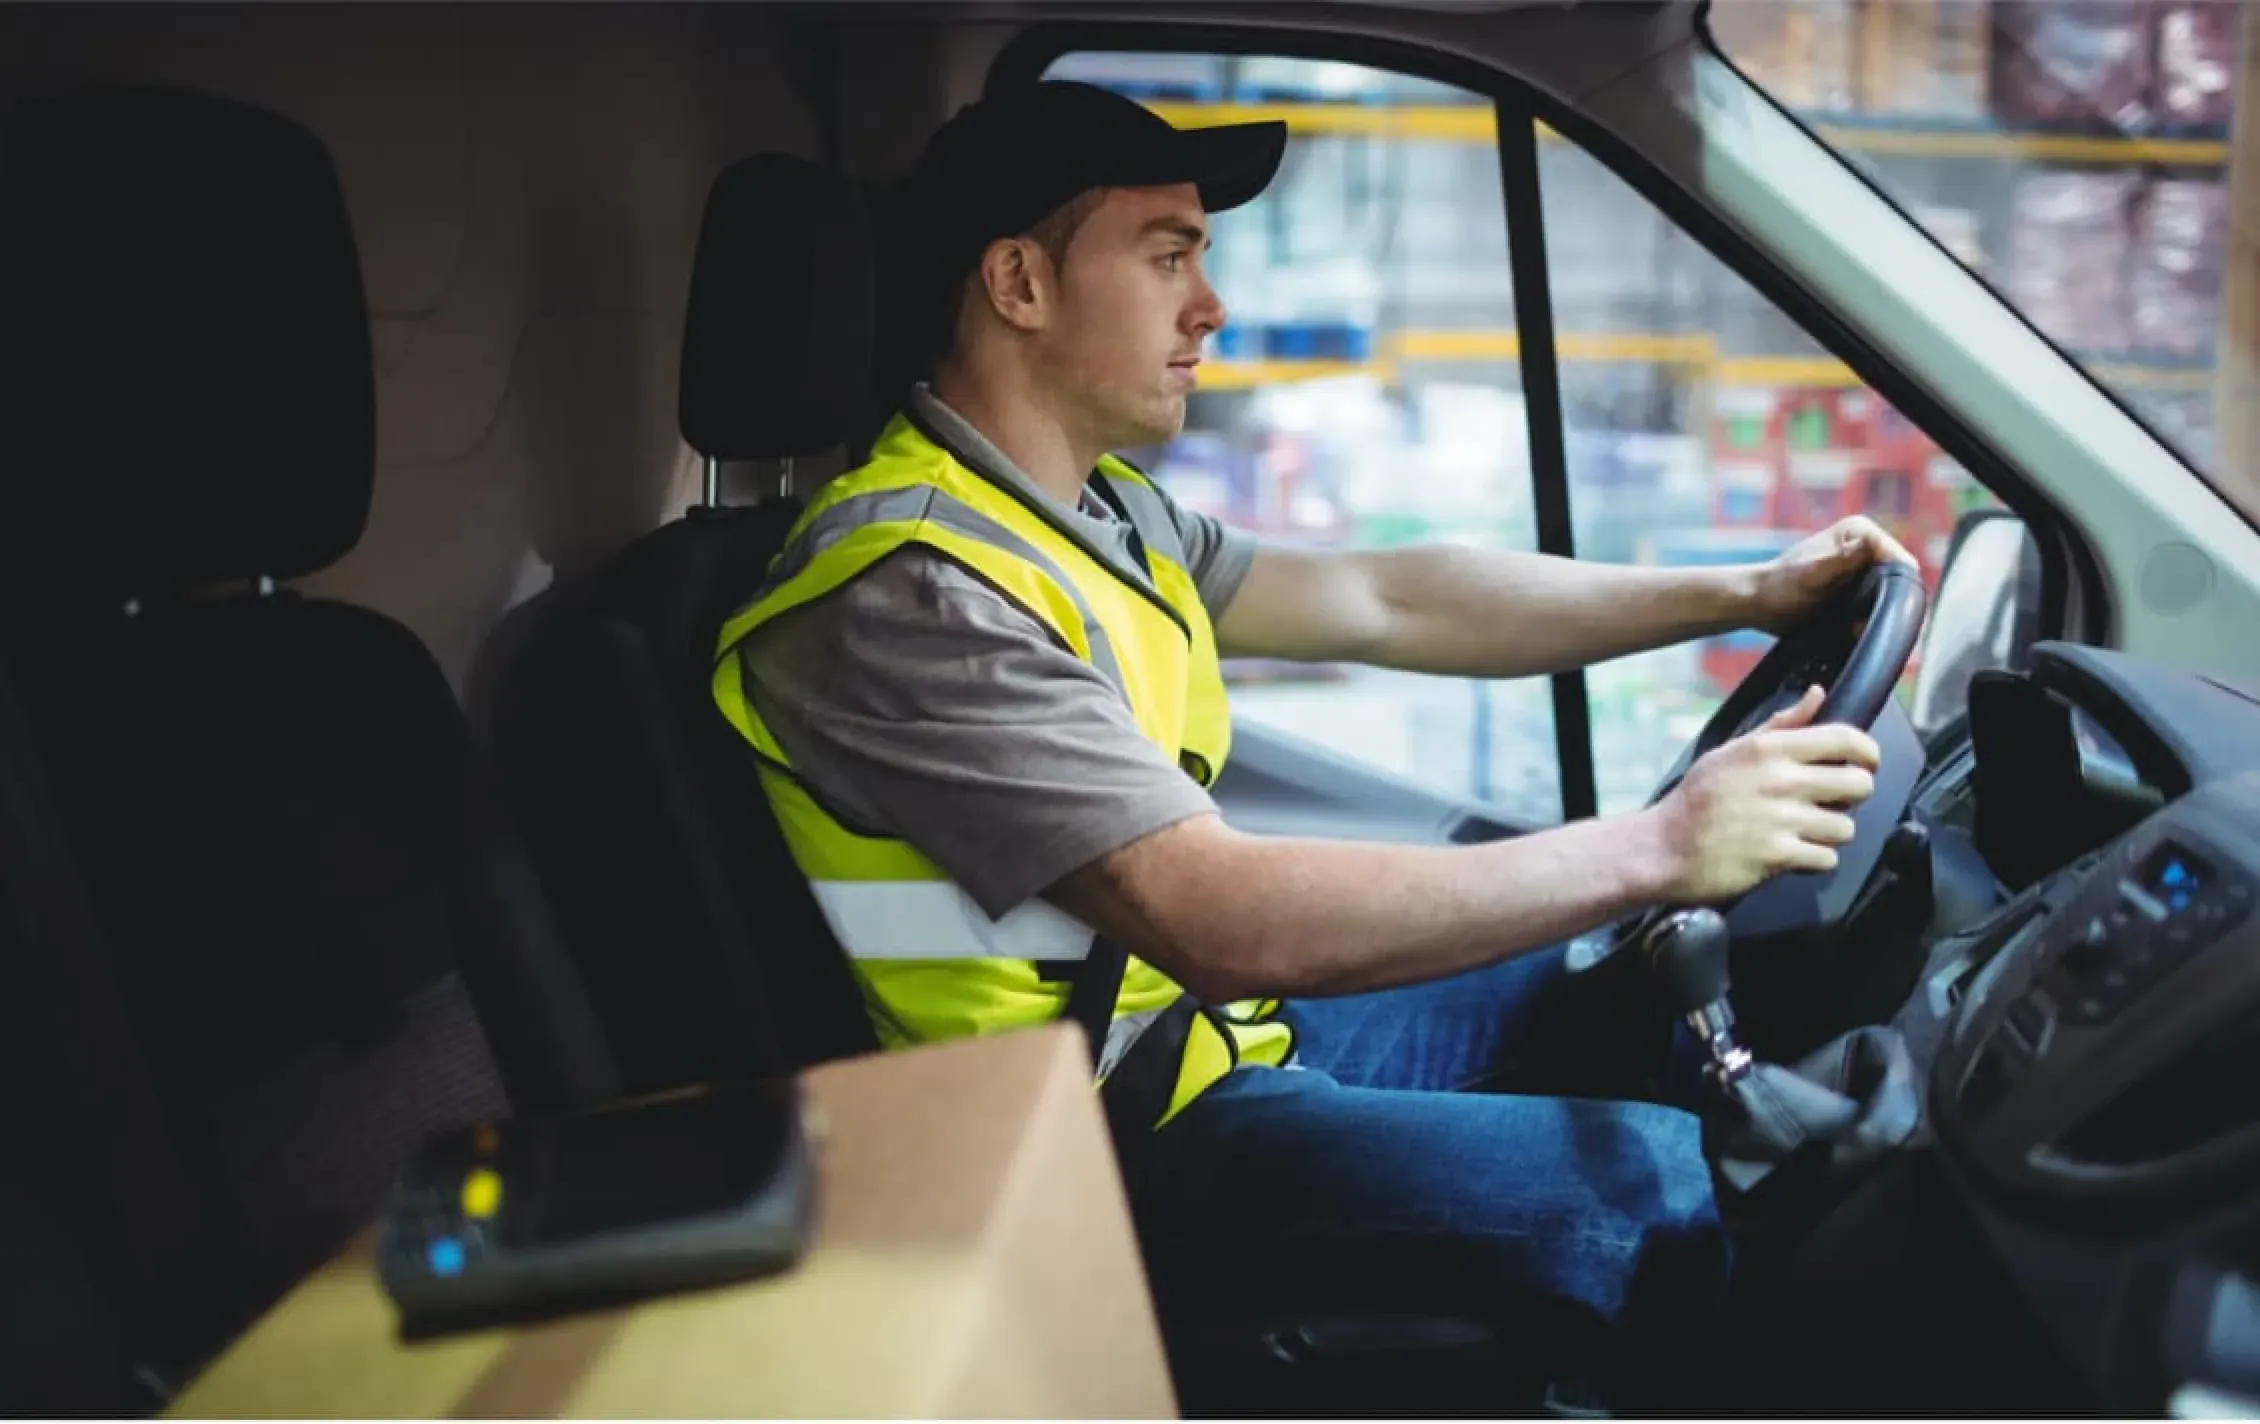 Sideview of a truck driver with their hands on the steering wheel.